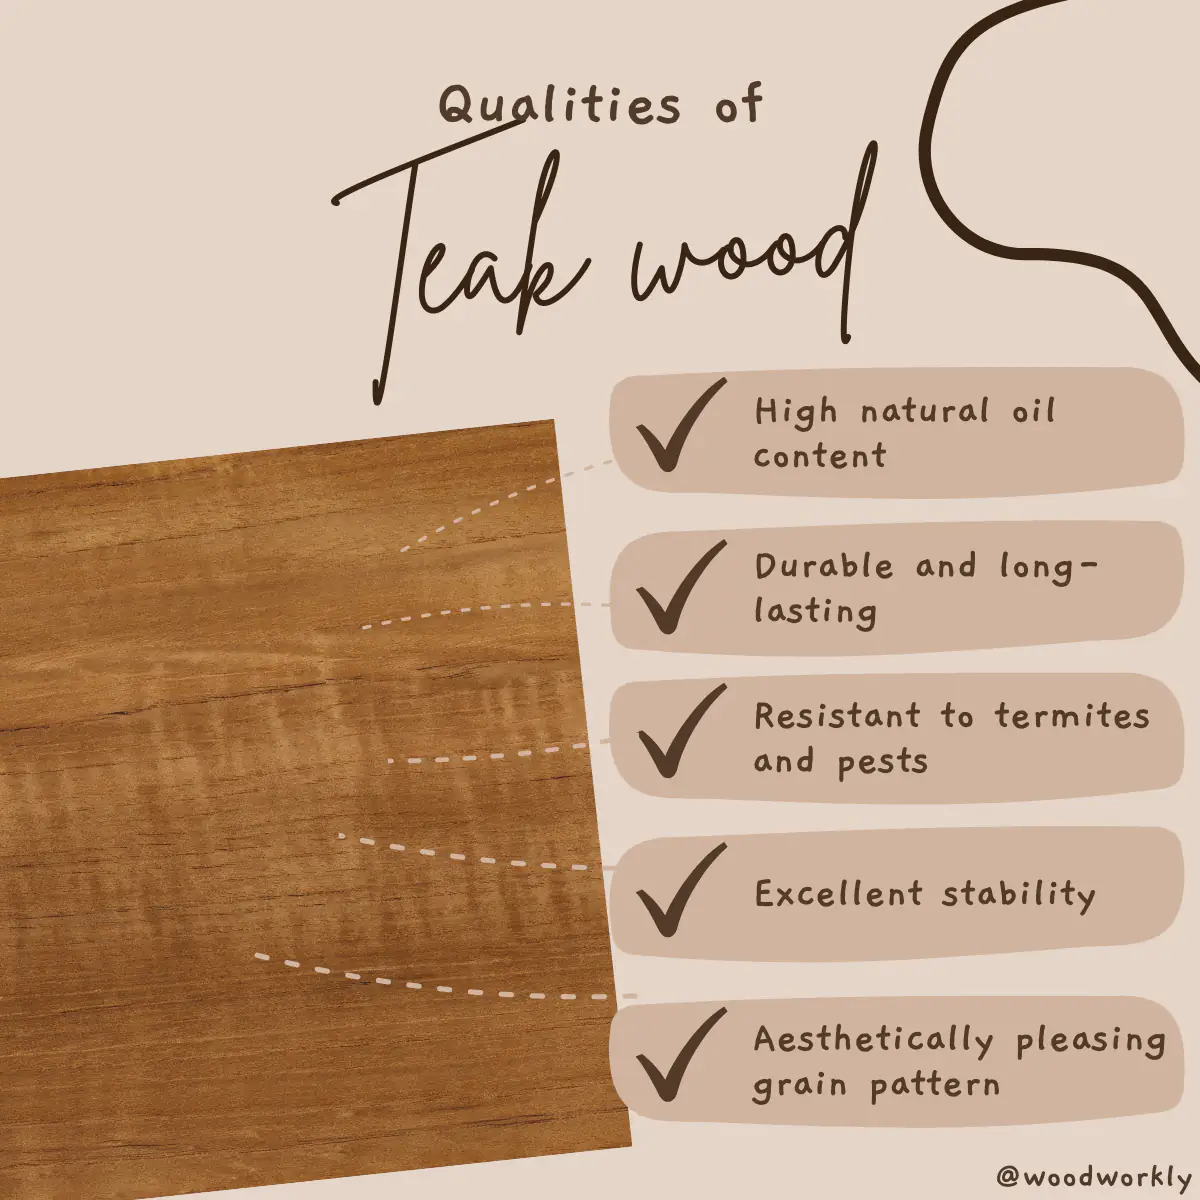 Qualities of Teak wood important when making a bed frame